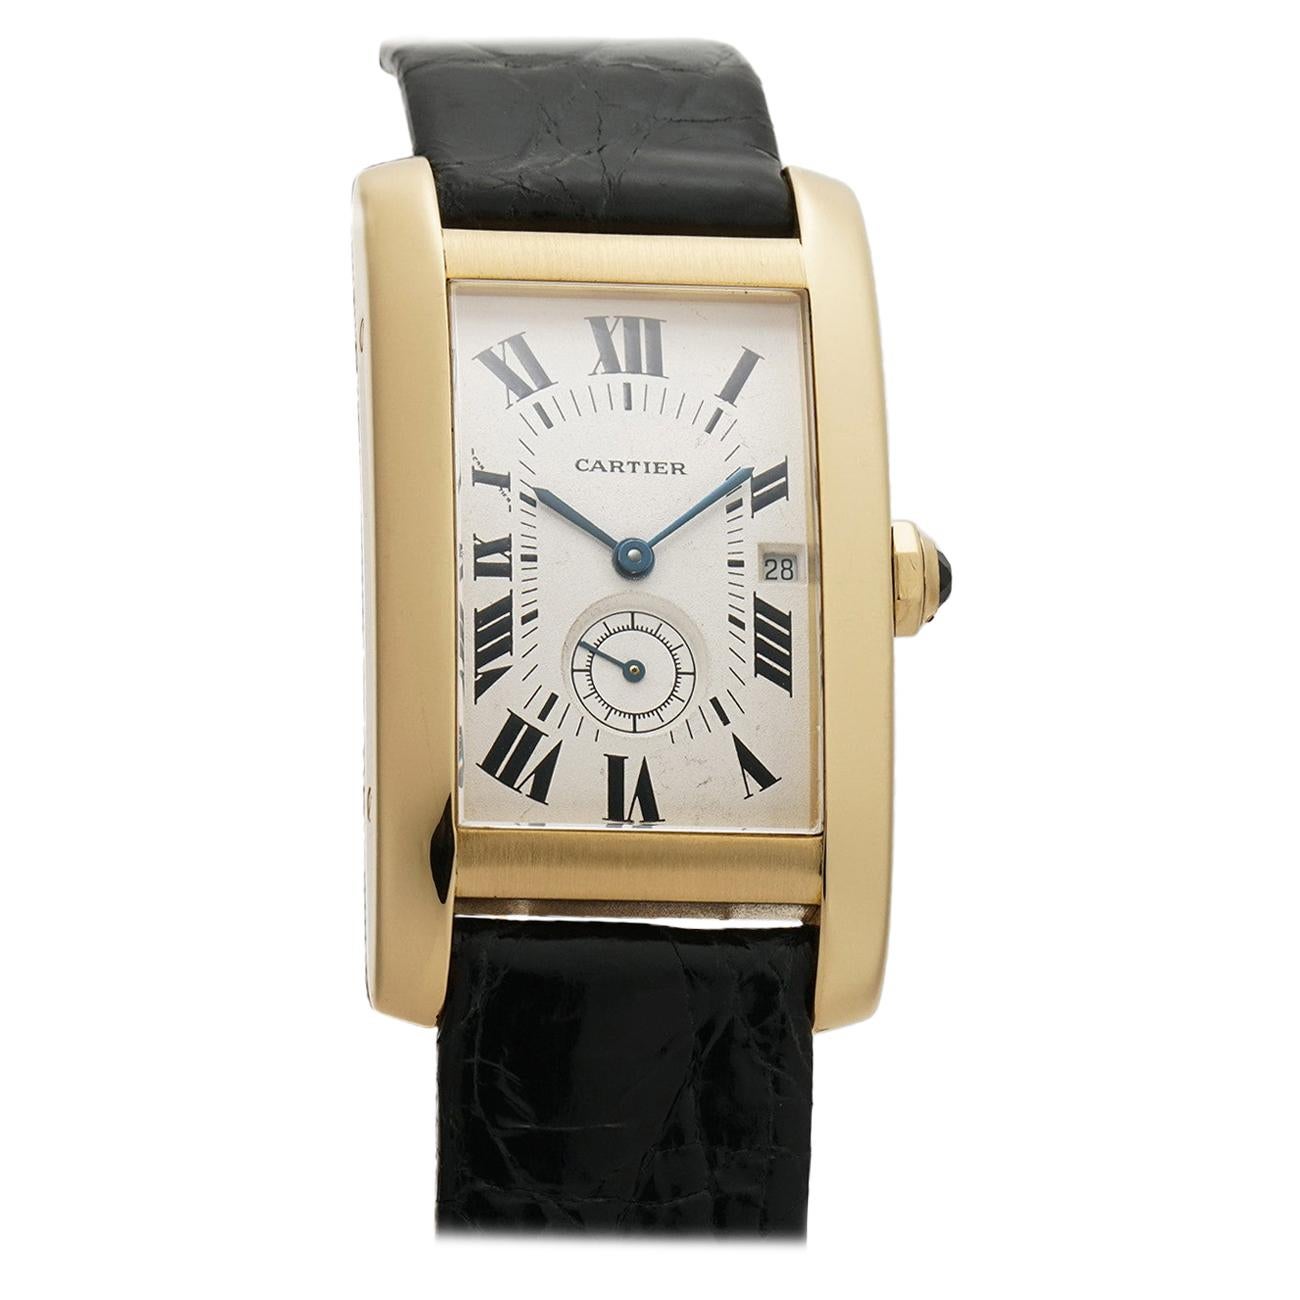 Cartier Tank Americaine 8012905, White Dial, Certified